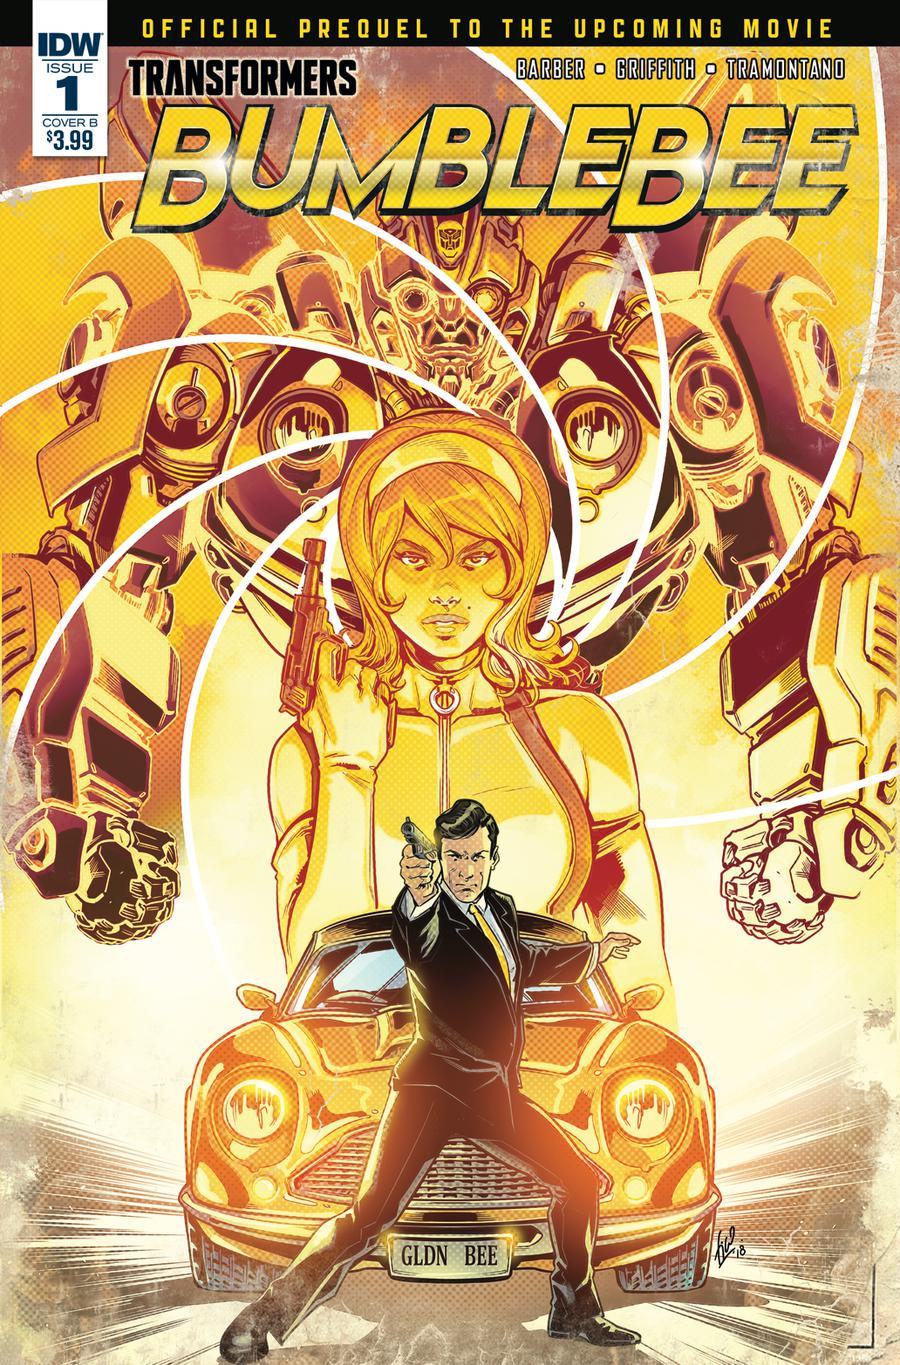 Transformers Bumblebee Movie Prequel #1 Cover B Variant Fico Ossio Cover